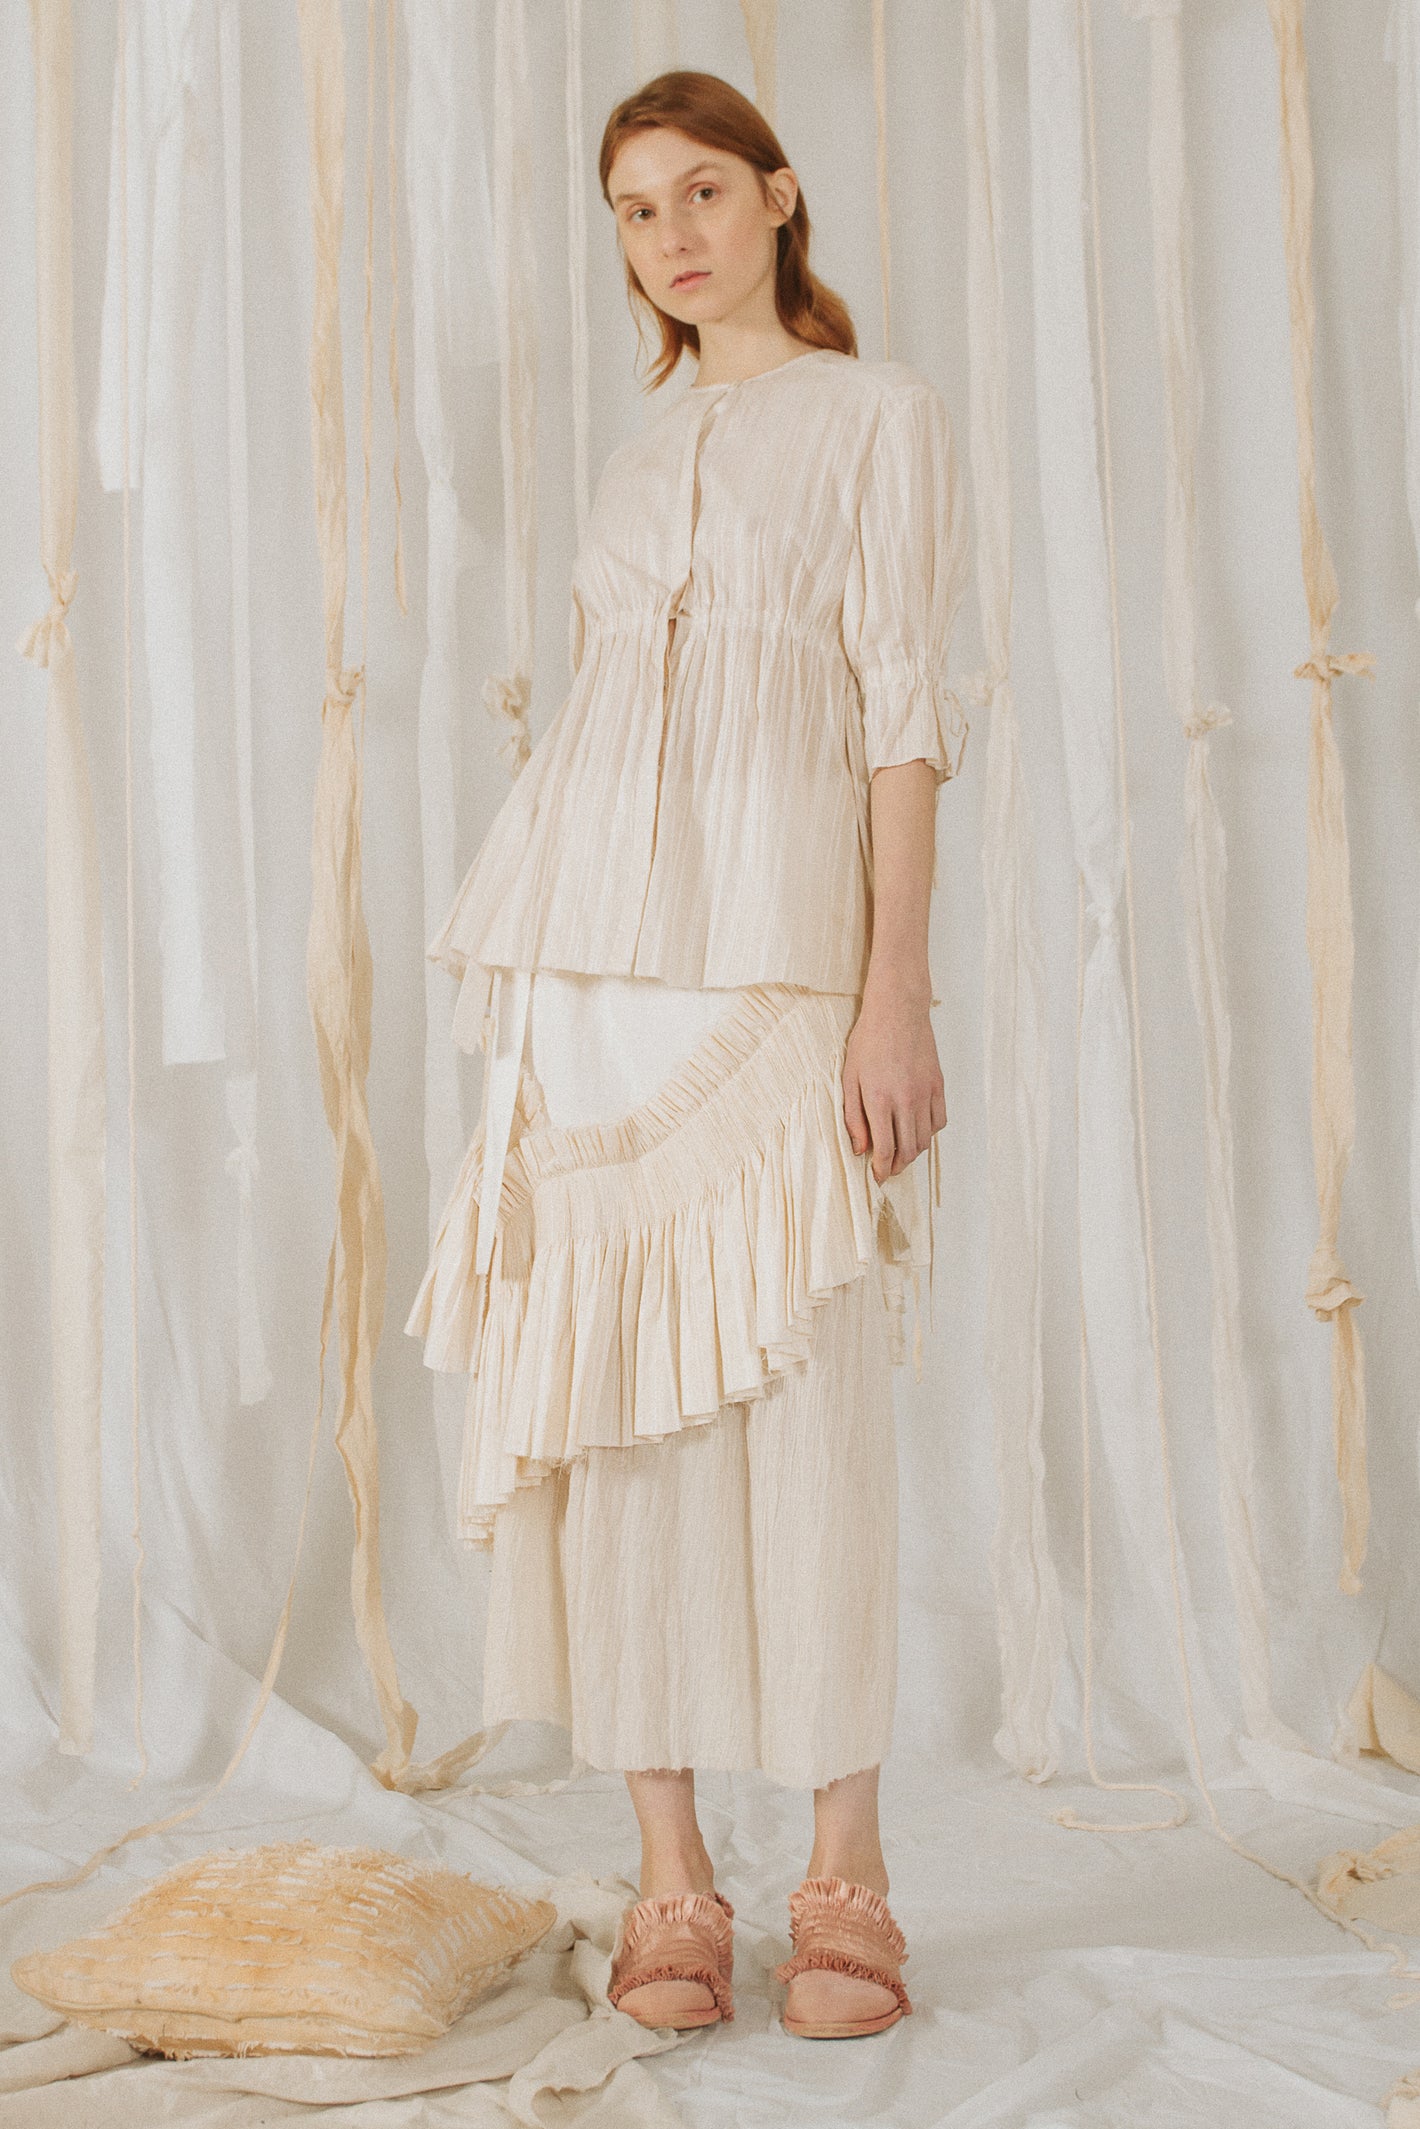 A Tentative Atelier SS18 Lookbook Womens off white half length sleeve top with ruched waist, styled with a ruffle appliqué skirt